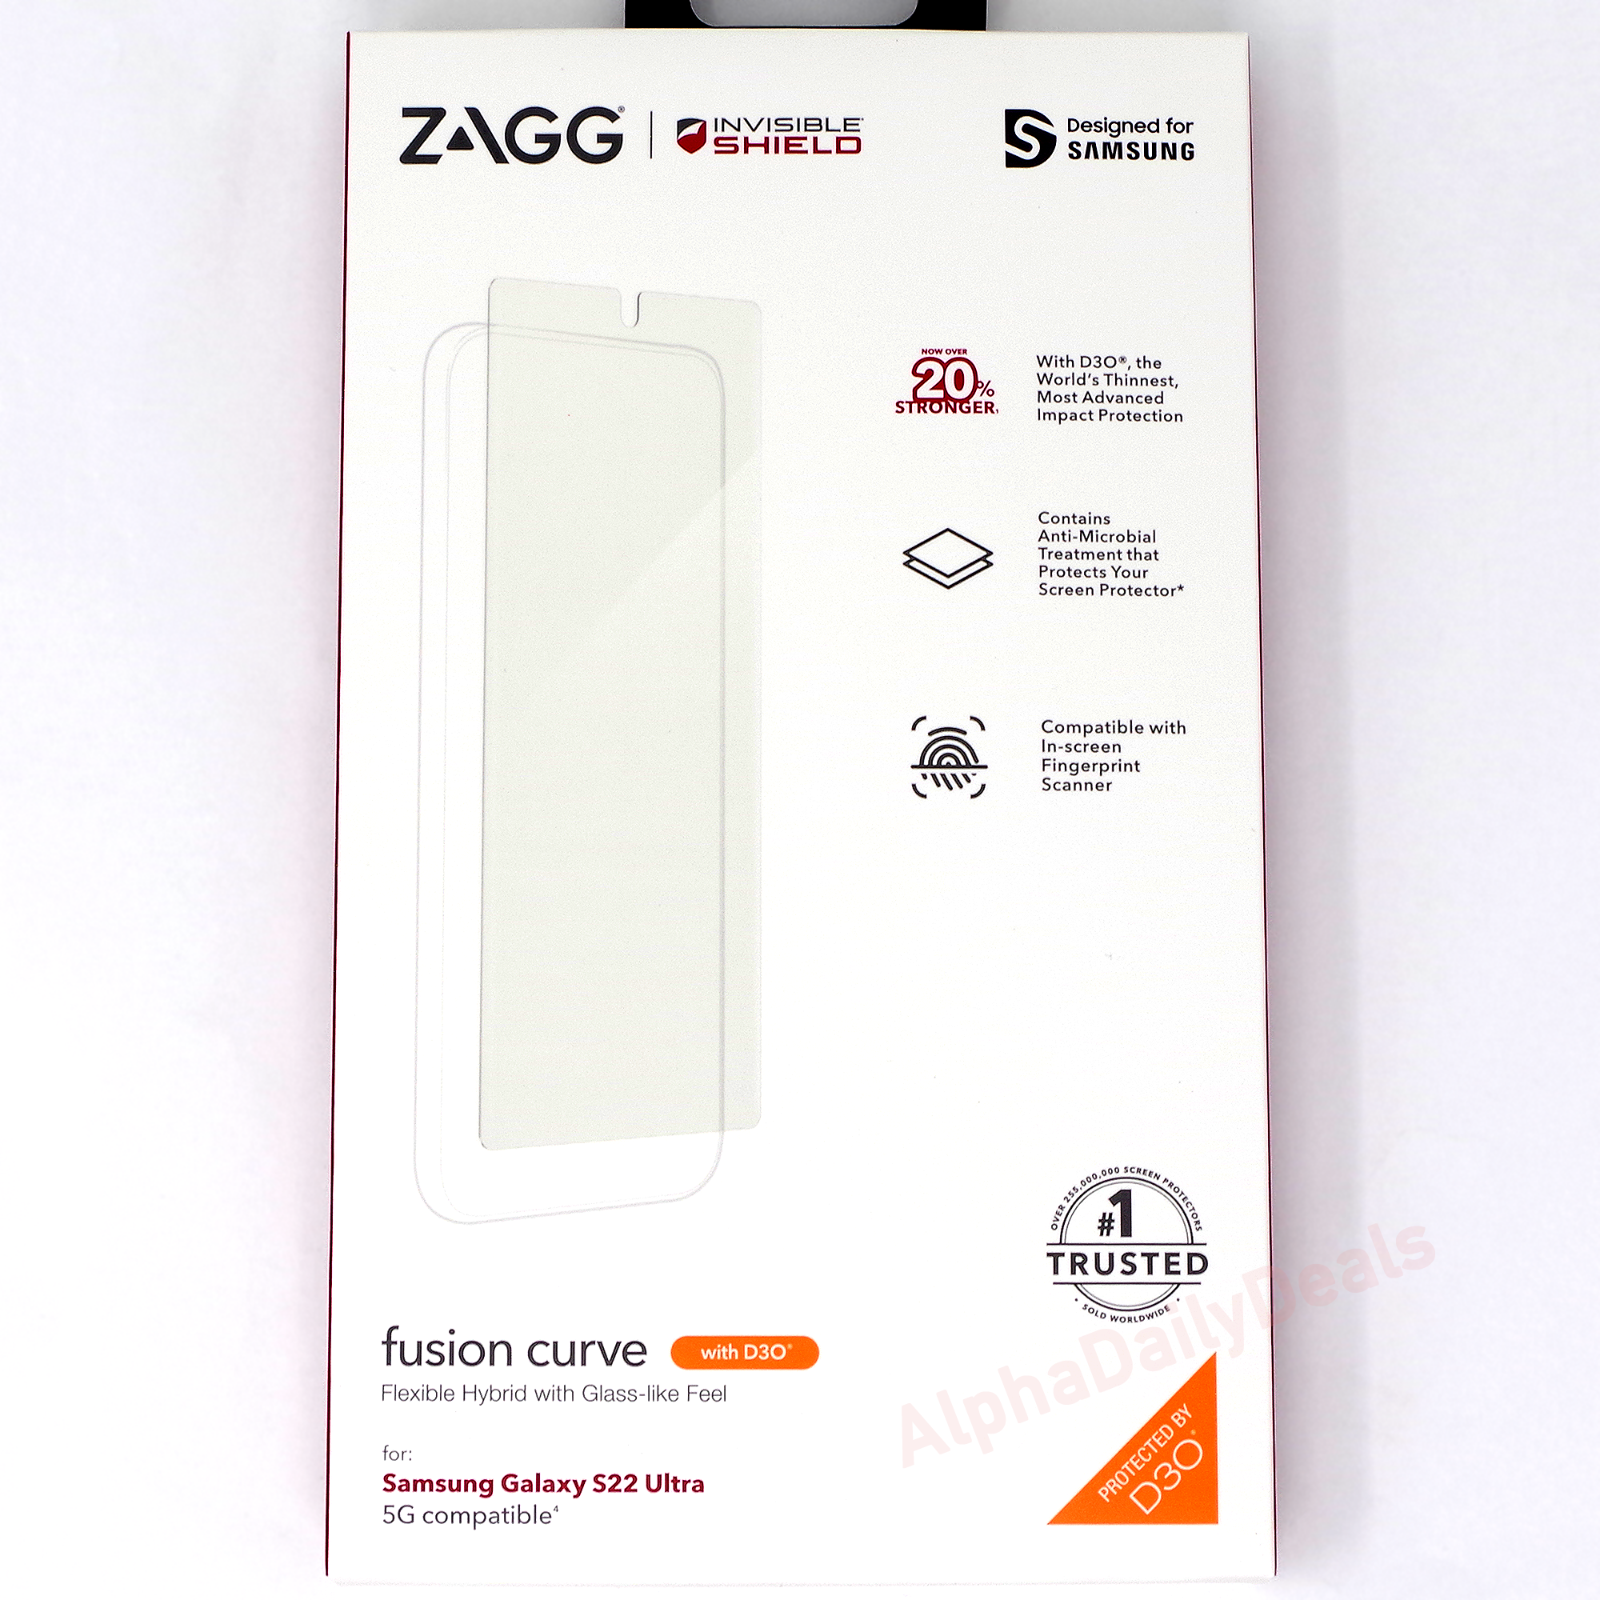 ZAGG Fusion Curve with D30 Screen Protector for Samsung Galaxy S22 Ultra